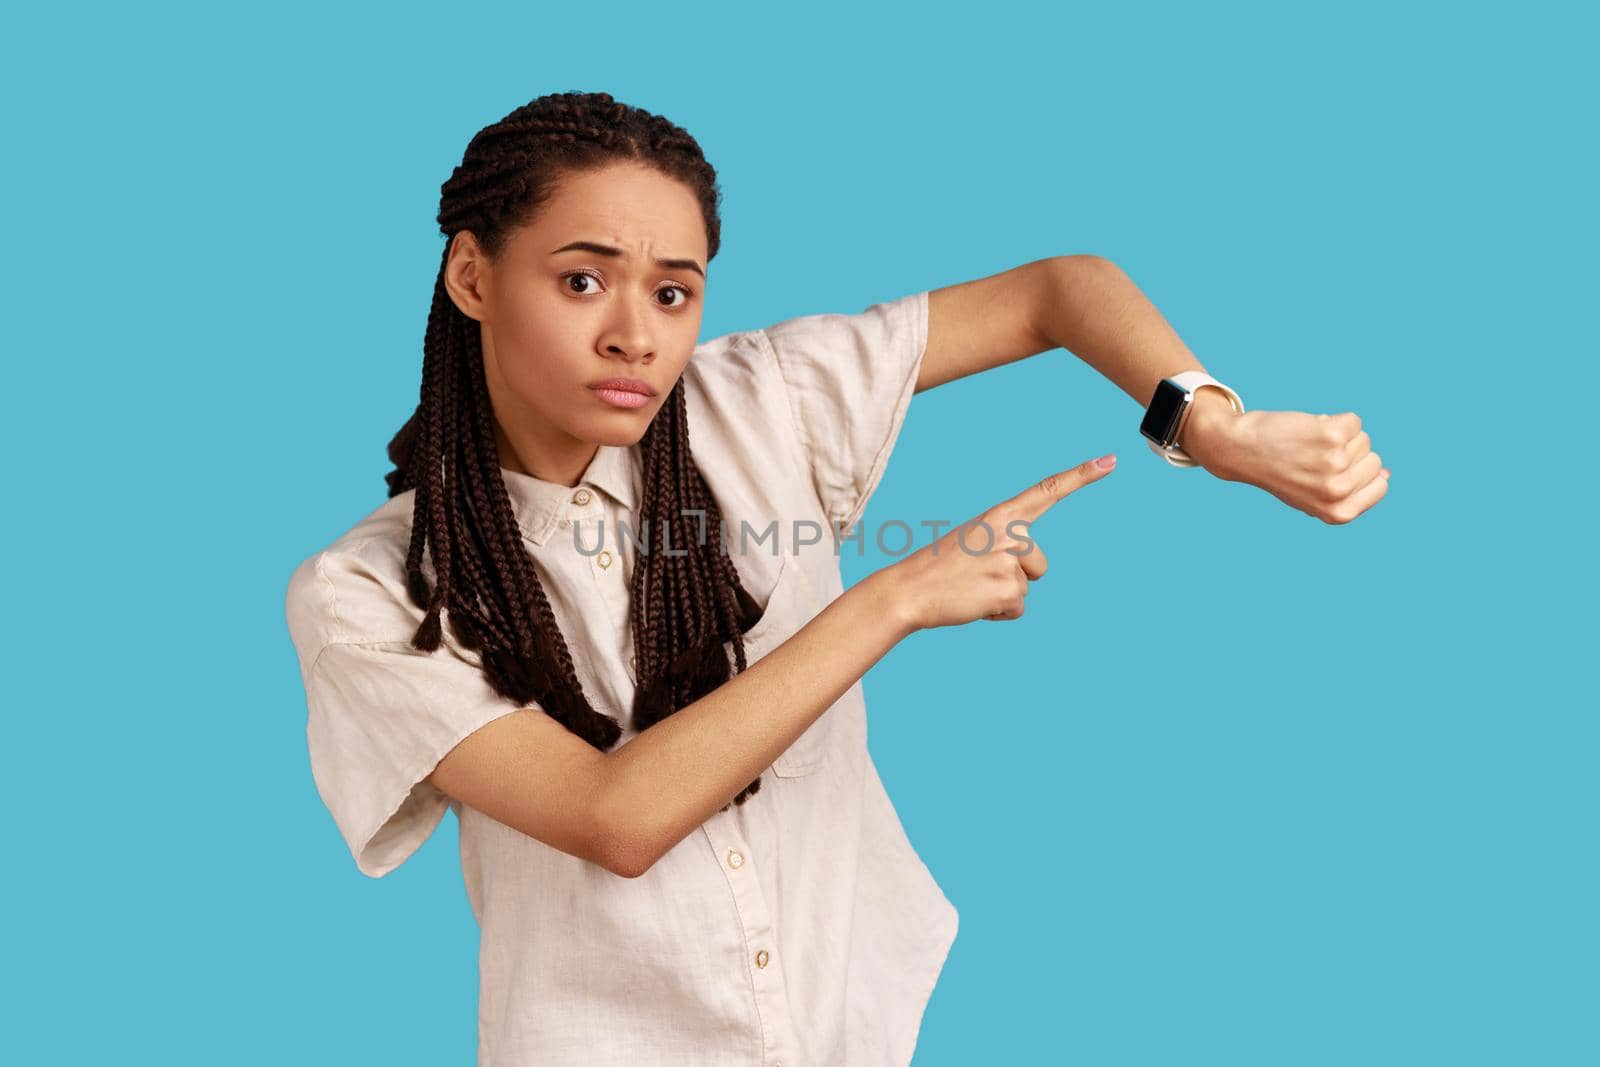 Concerned punctual woman with black dreadlocks pointing finger at smartwatch on her wrist, look at time, hurry up and act, wearing white shirt. Indoor studio shot isolated on blue background.